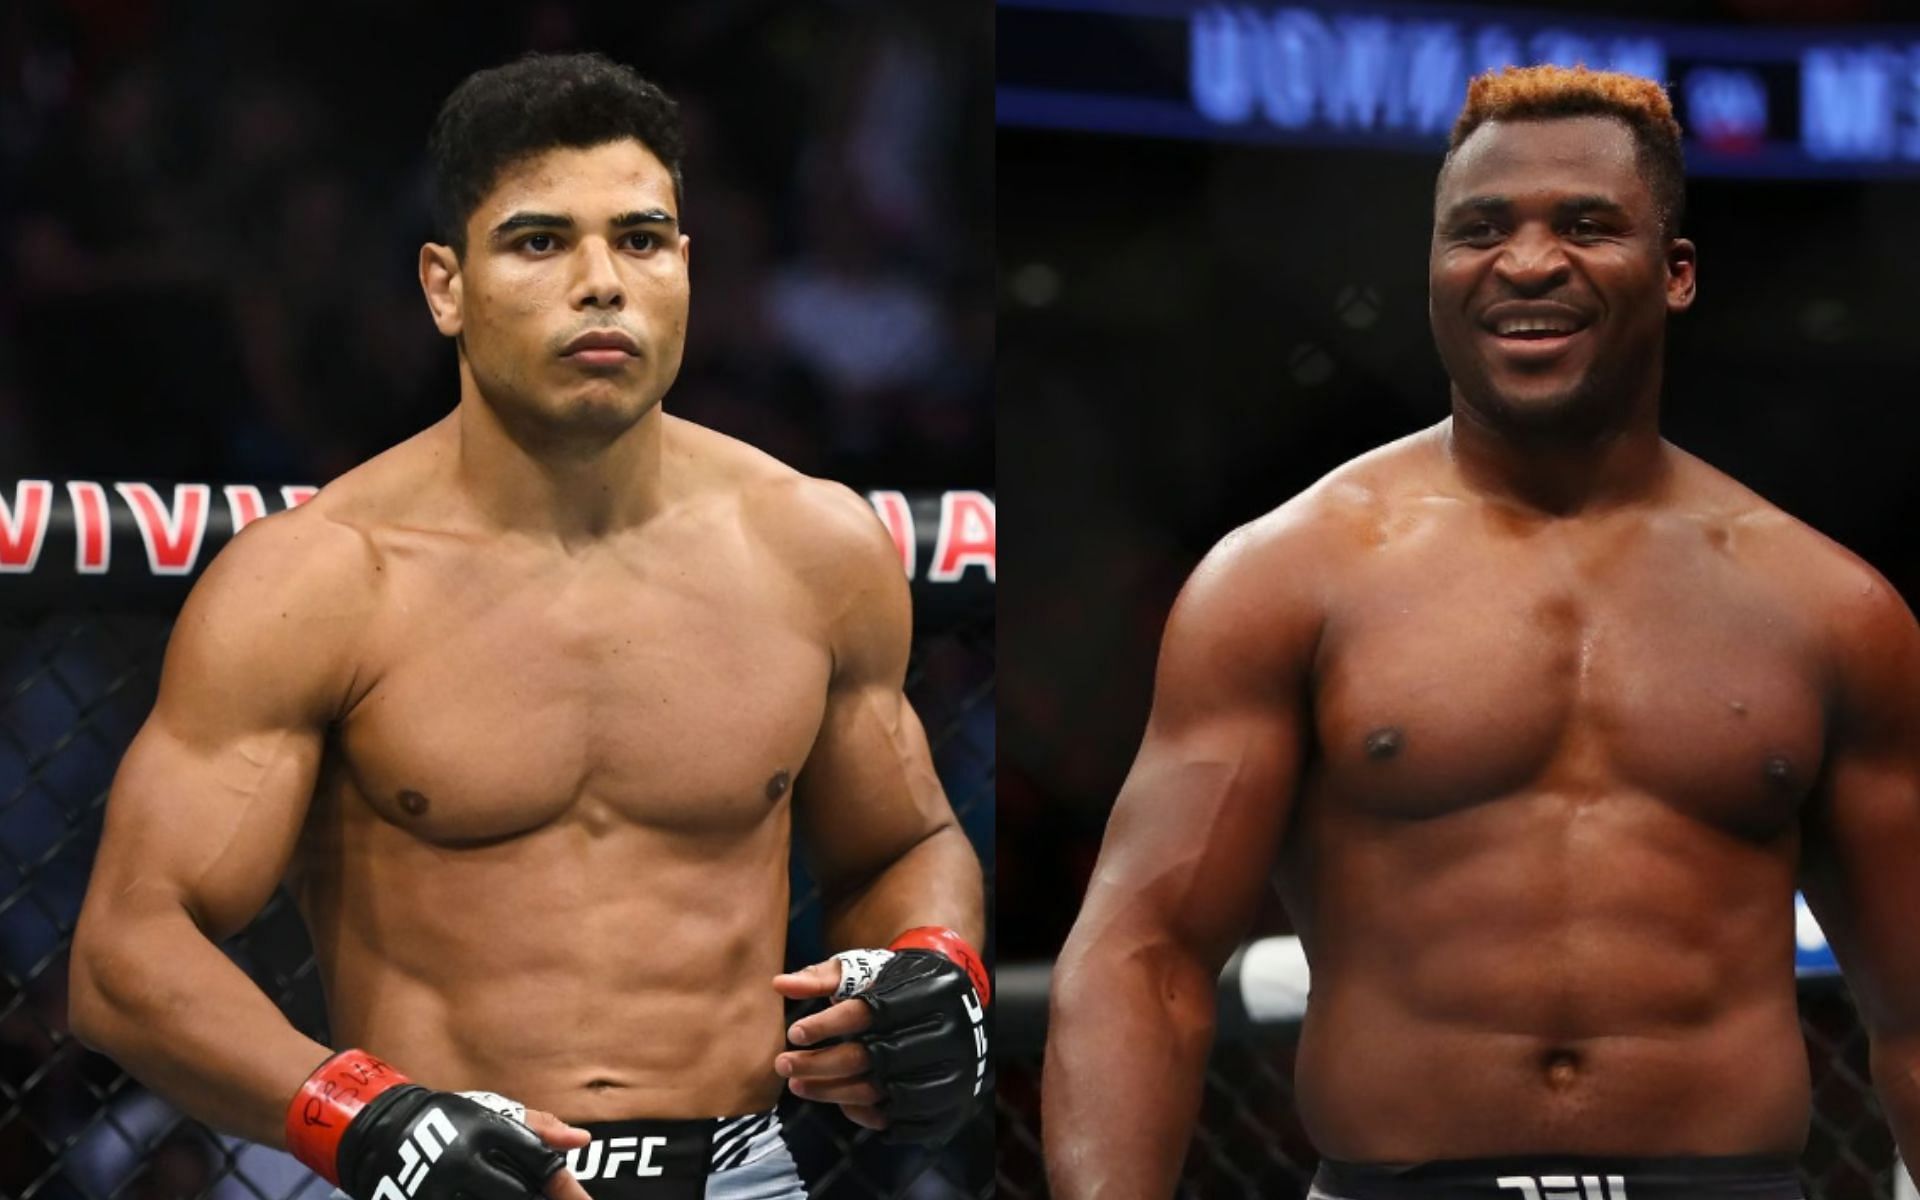 Paulo Costa shows interest in Francis Ngannou fight days after announcing new UFC deal